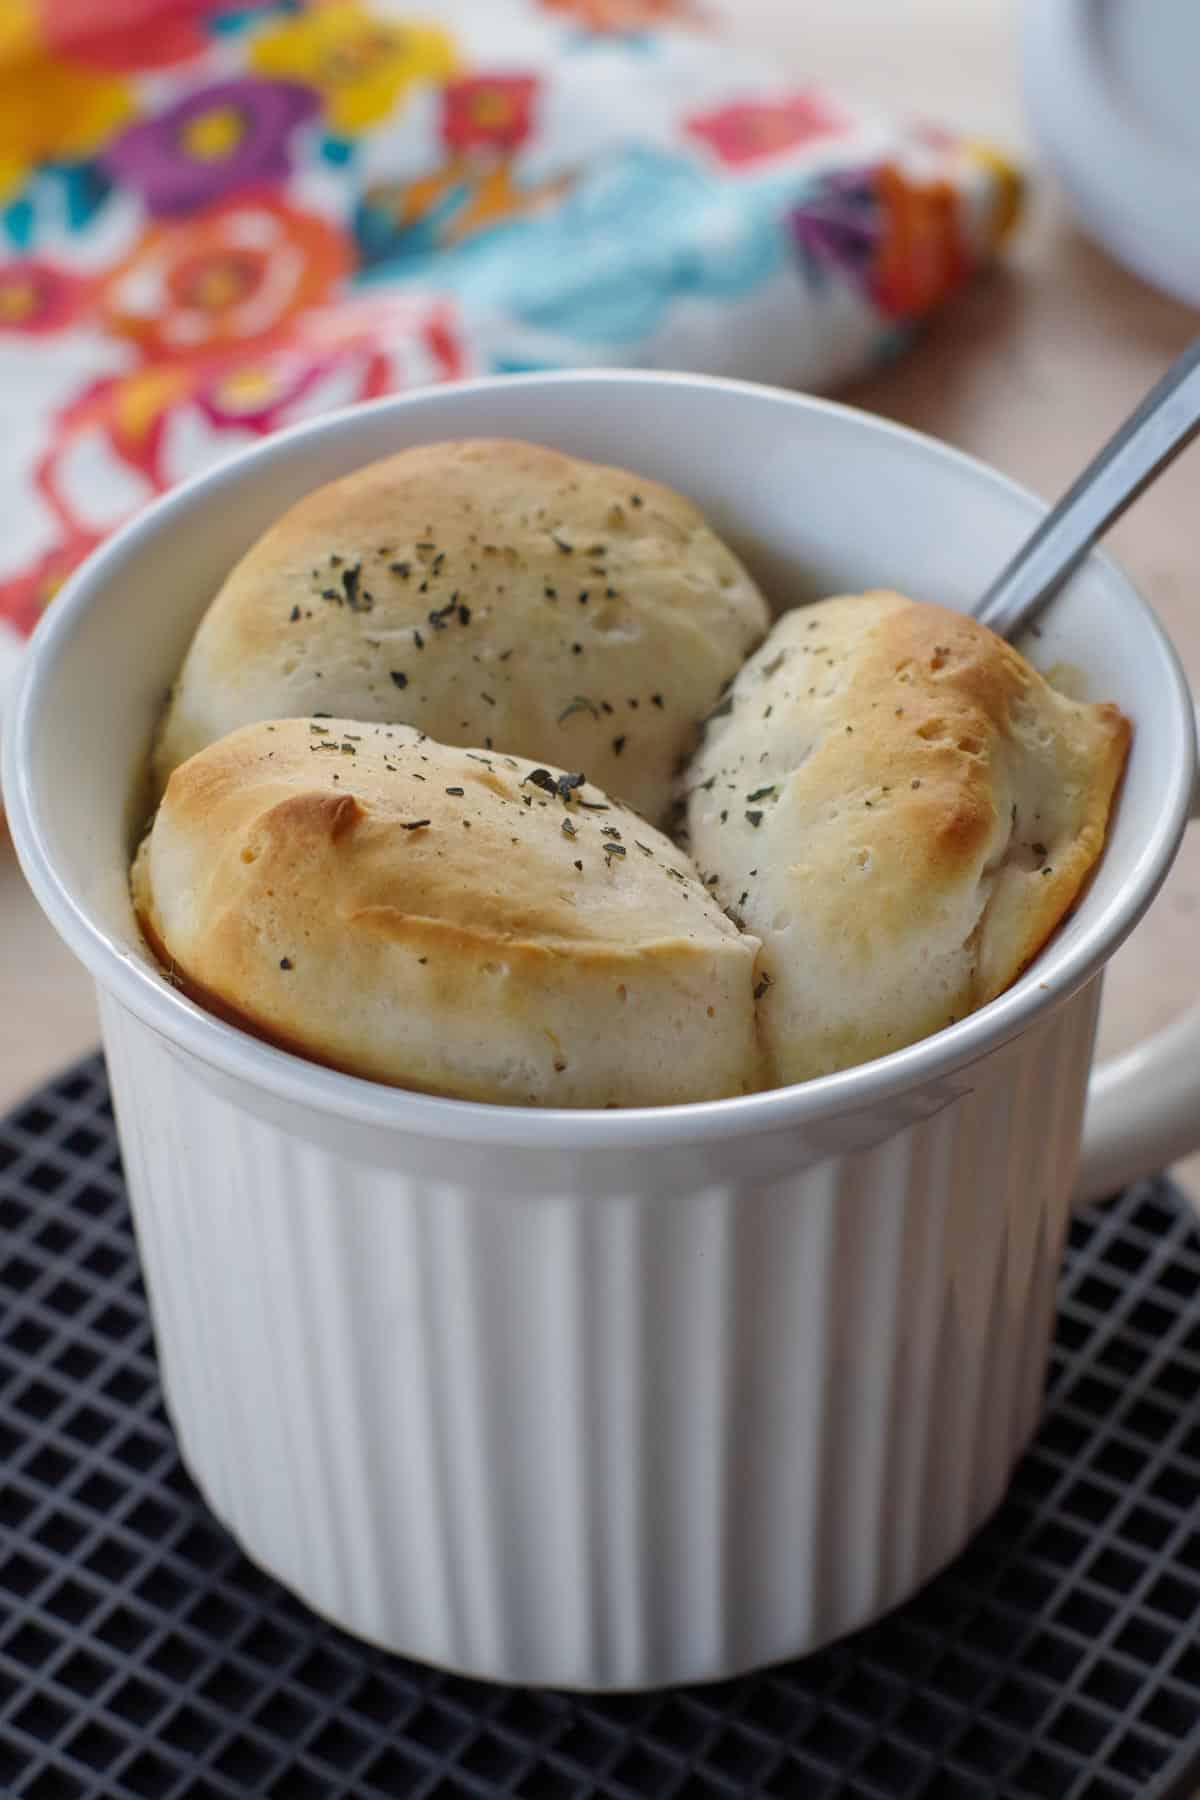 personal chicken pot pie in a white meal mug with a spoon